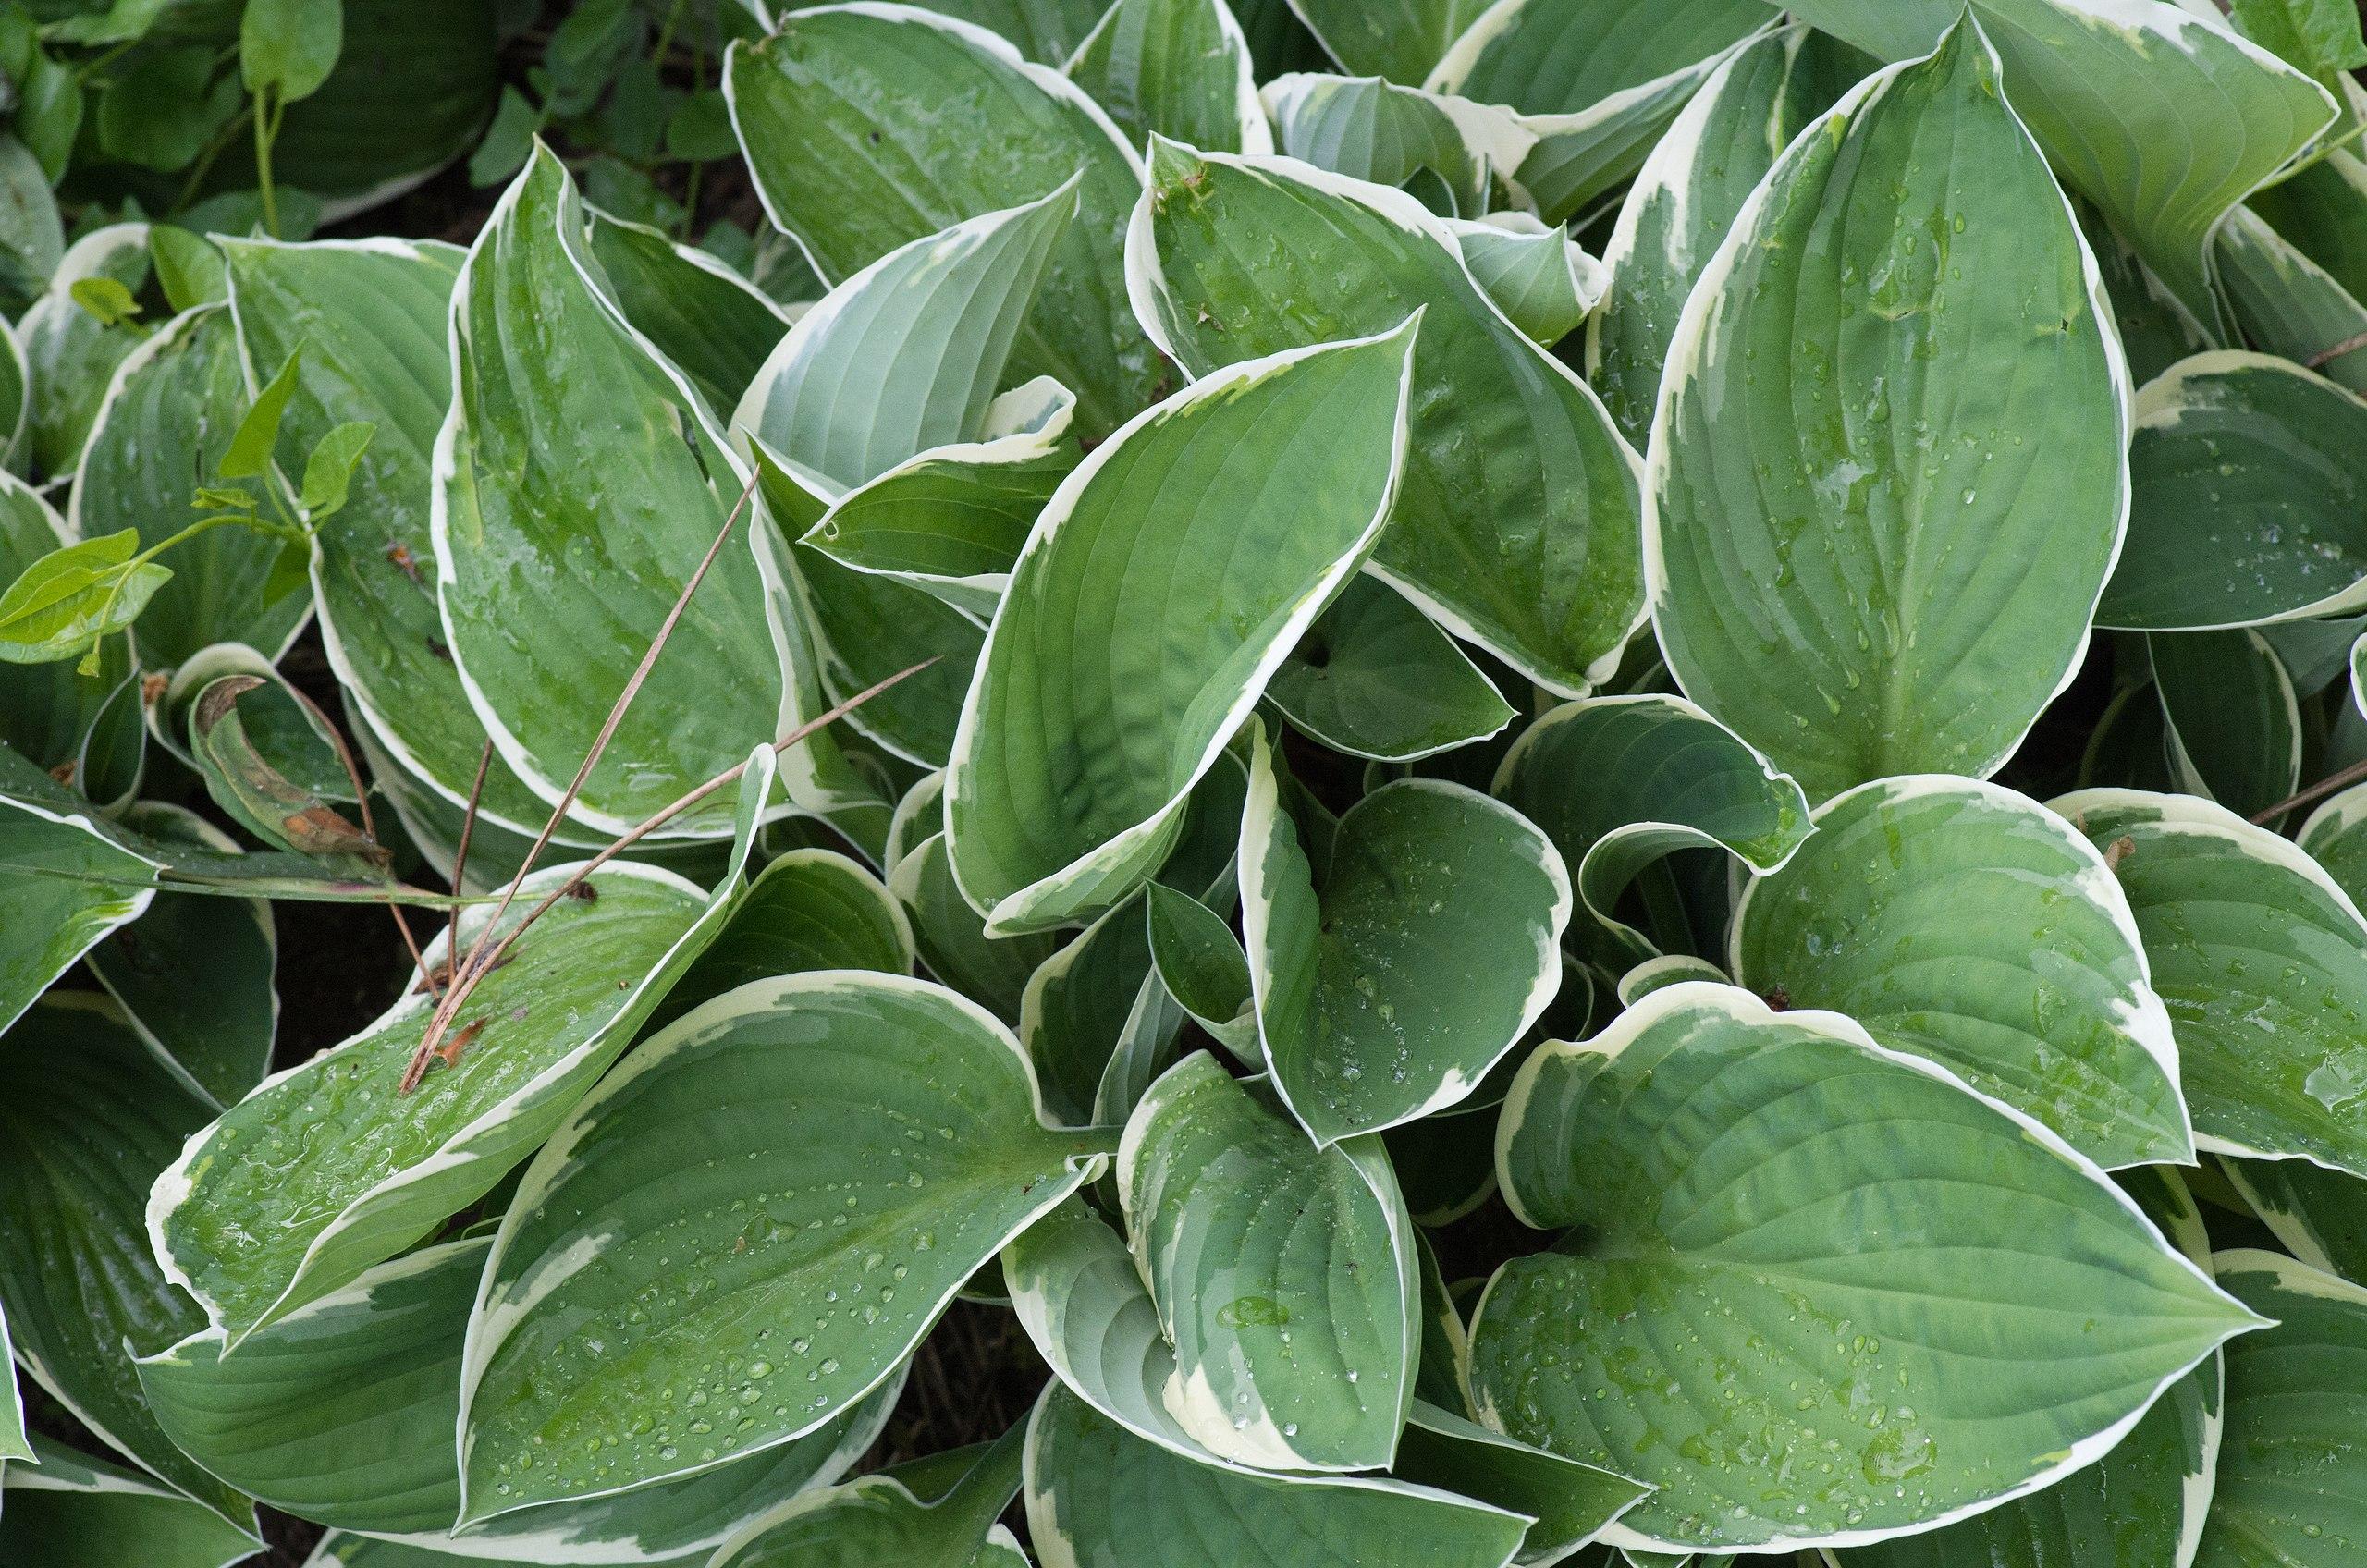 Green-white leaves with green midrib, green petiole and white blades.